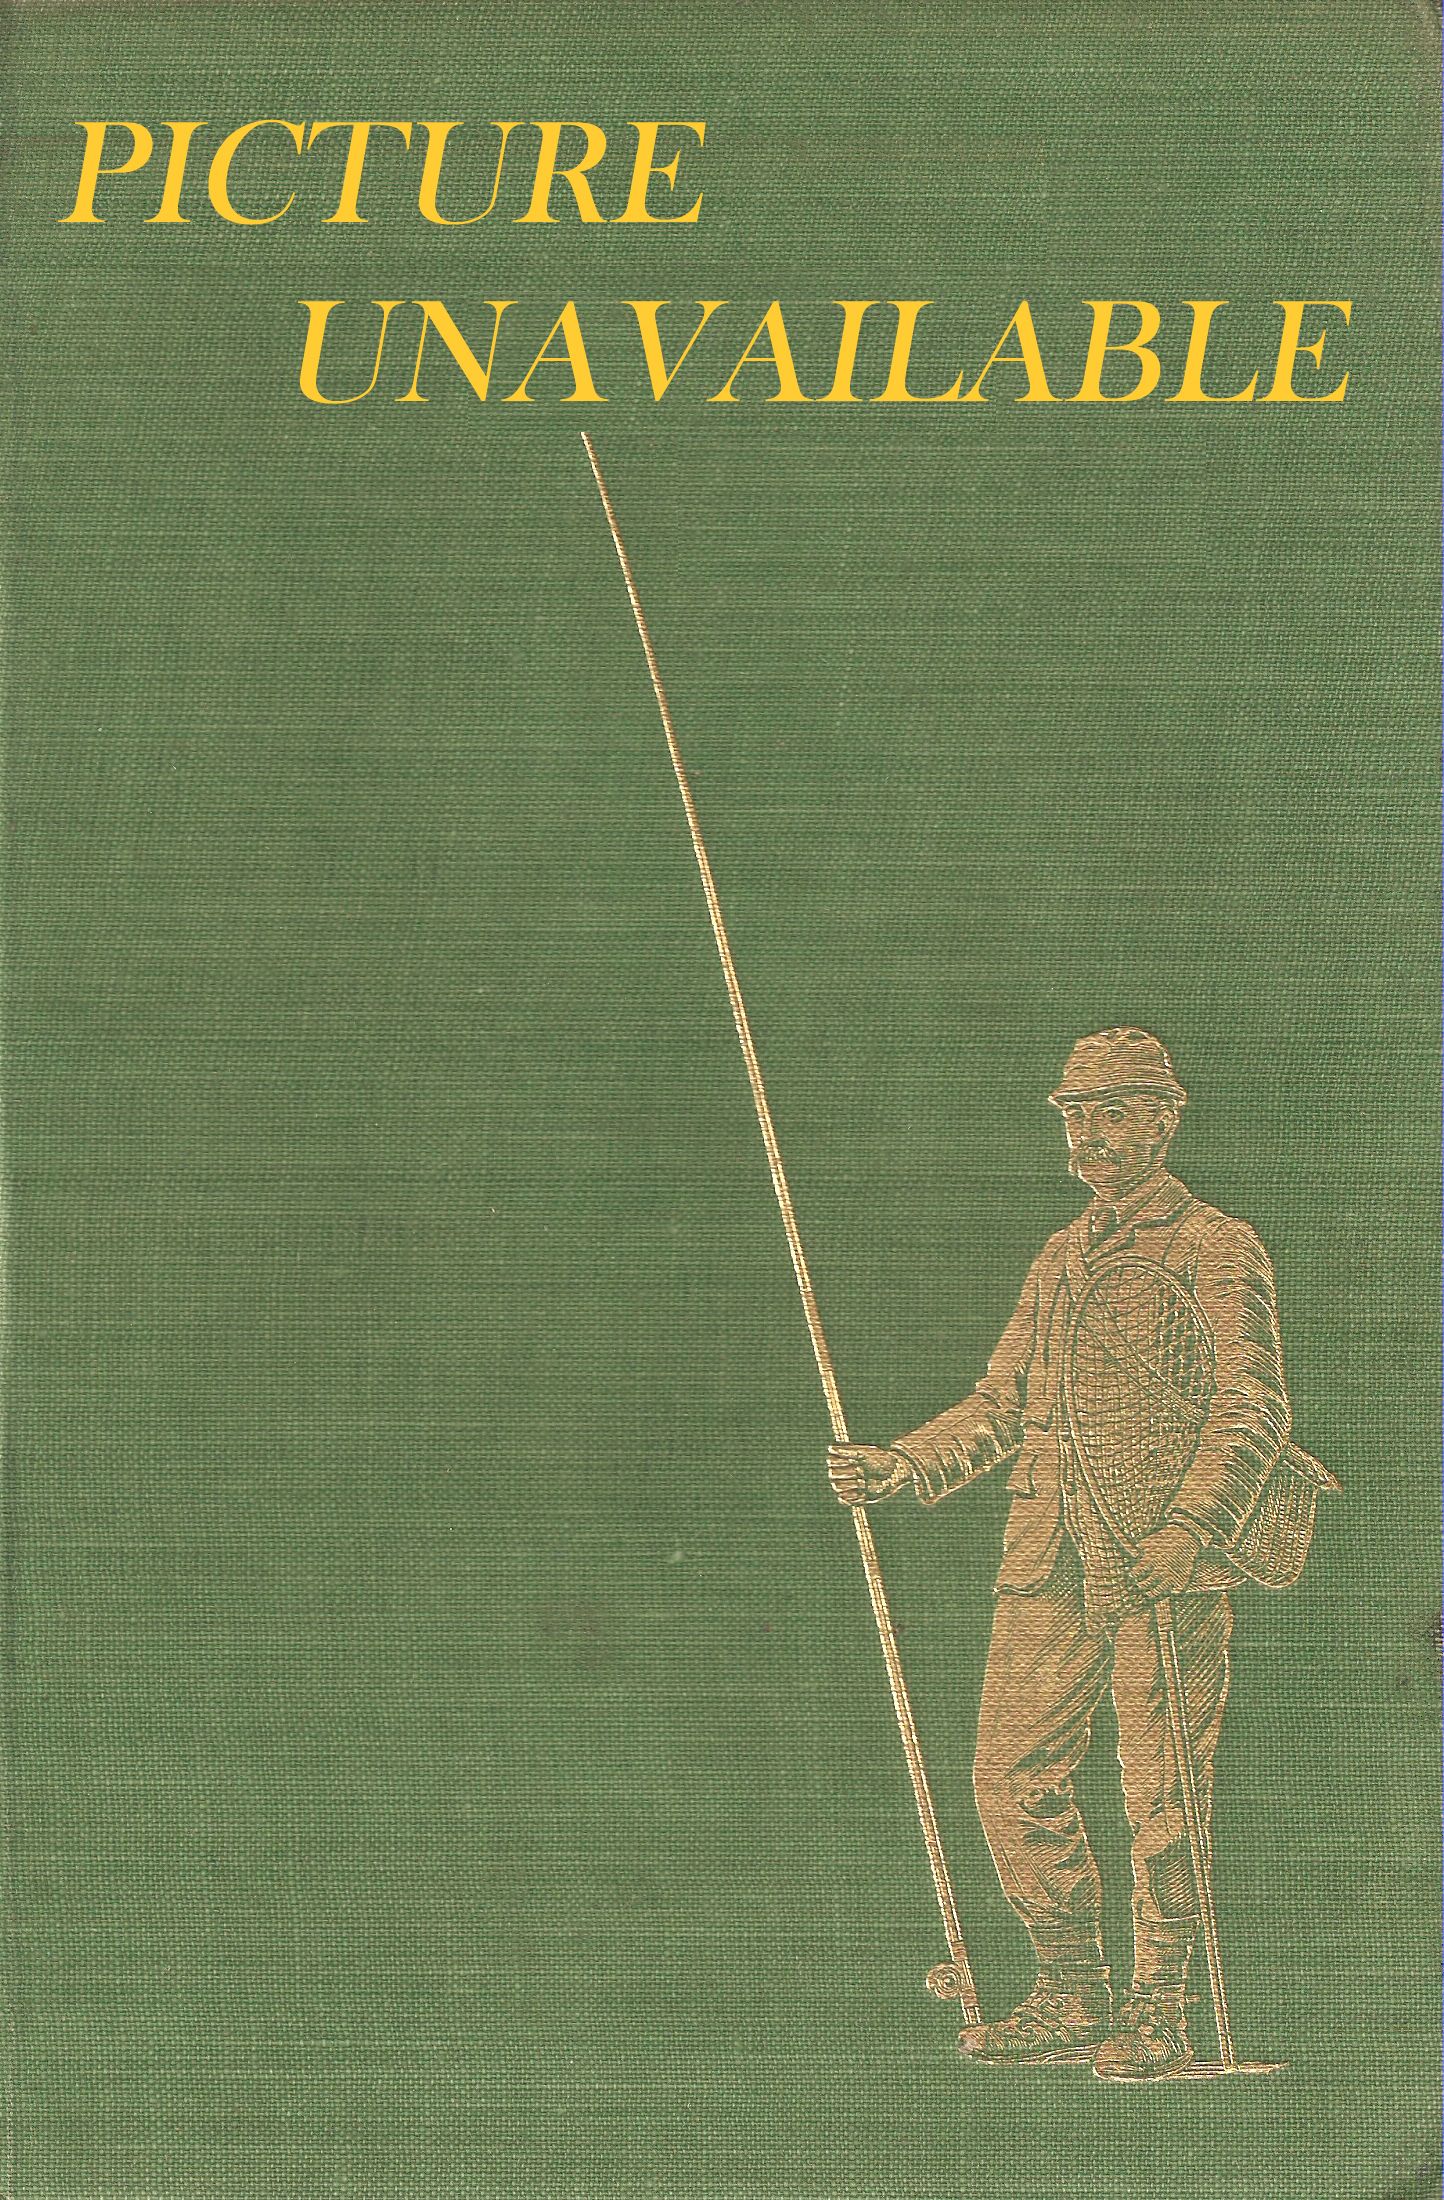 FERRETING AND TRAPPING FOR AMATEUR GAMEKEEPERS. By Guy N. Smith.  Photographs by Lance Smith. Drawings by Pat Lakin.